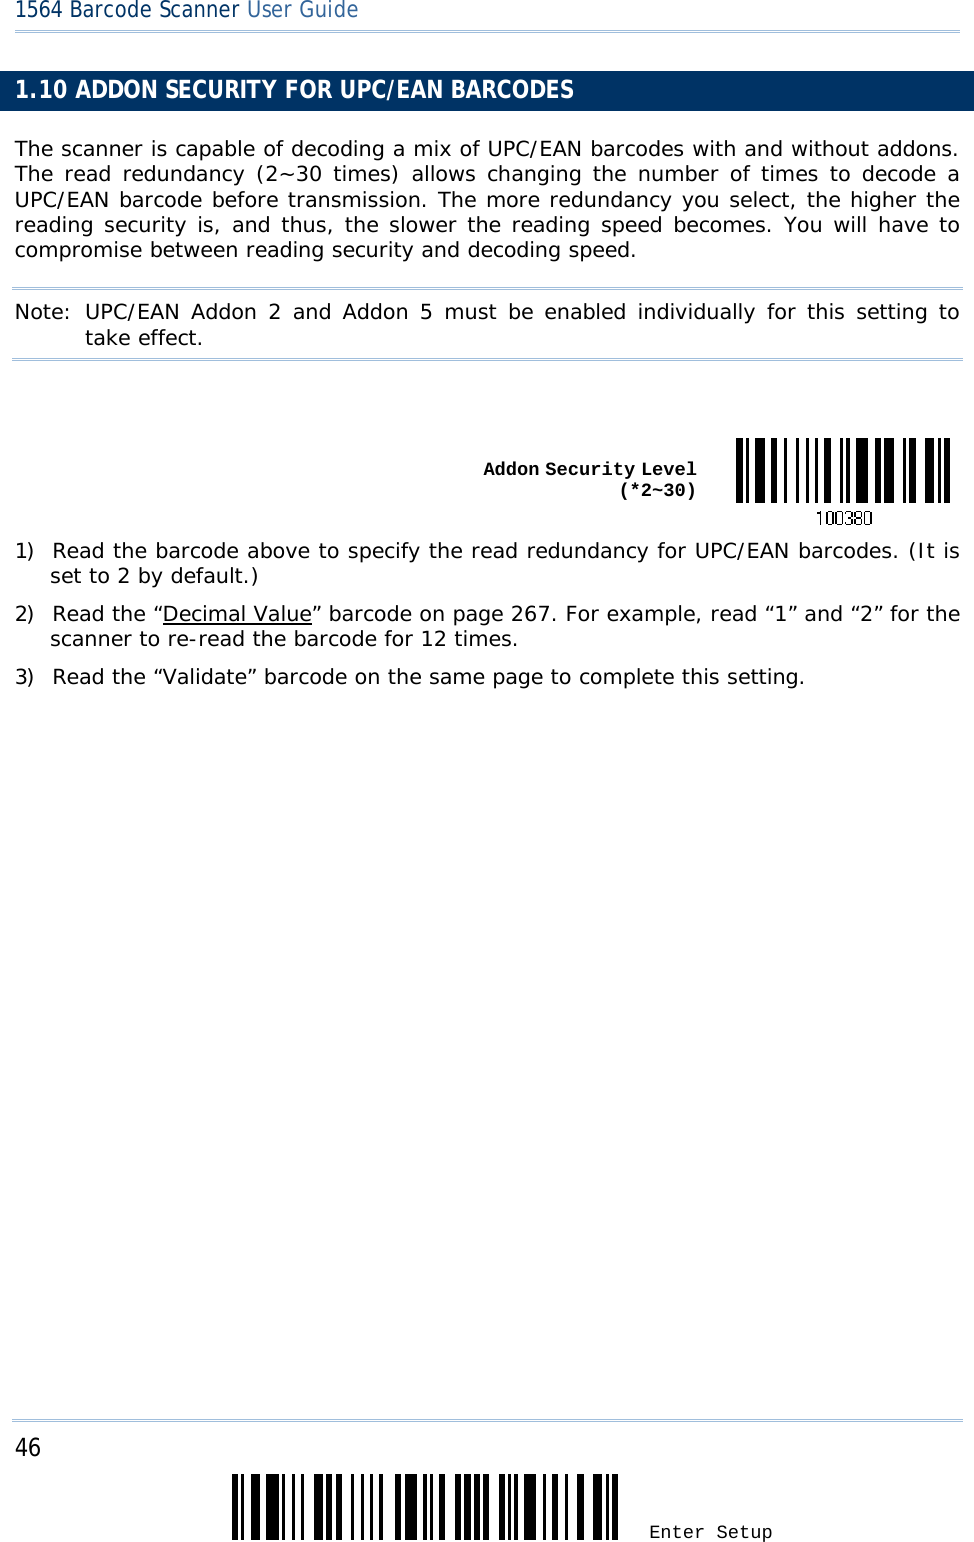 46 Enter Setup 1564 Barcode Scanner User Guide  1.10 ADDON SECURITY FOR UPC/EAN BARCODES The scanner is capable of decoding a mix of UPC/EAN barcodes with and without addons. The read redundancy (2~30 times) allows changing the number of times to decode a UPC/EAN barcode before transmission. The more redundancy you select, the higher the reading security is, and thus, the slower the reading speed becomes. You will have to compromise between reading security and decoding speed. Note: UPC/EAN Addon 2 and Addon 5 must be enabled individually for this setting to take effect.    Addon Security Level (*2~30)1) Read the barcode above to specify the read redundancy for UPC/EAN barcodes. (It is set to 2 by default.) 2) Read the “Decimal Value” barcode on page 267. For example, read “1” and “2” for the scanner to re-read the barcode for 12 times.  3) Read the “Validate” barcode on the same page to complete this setting.   